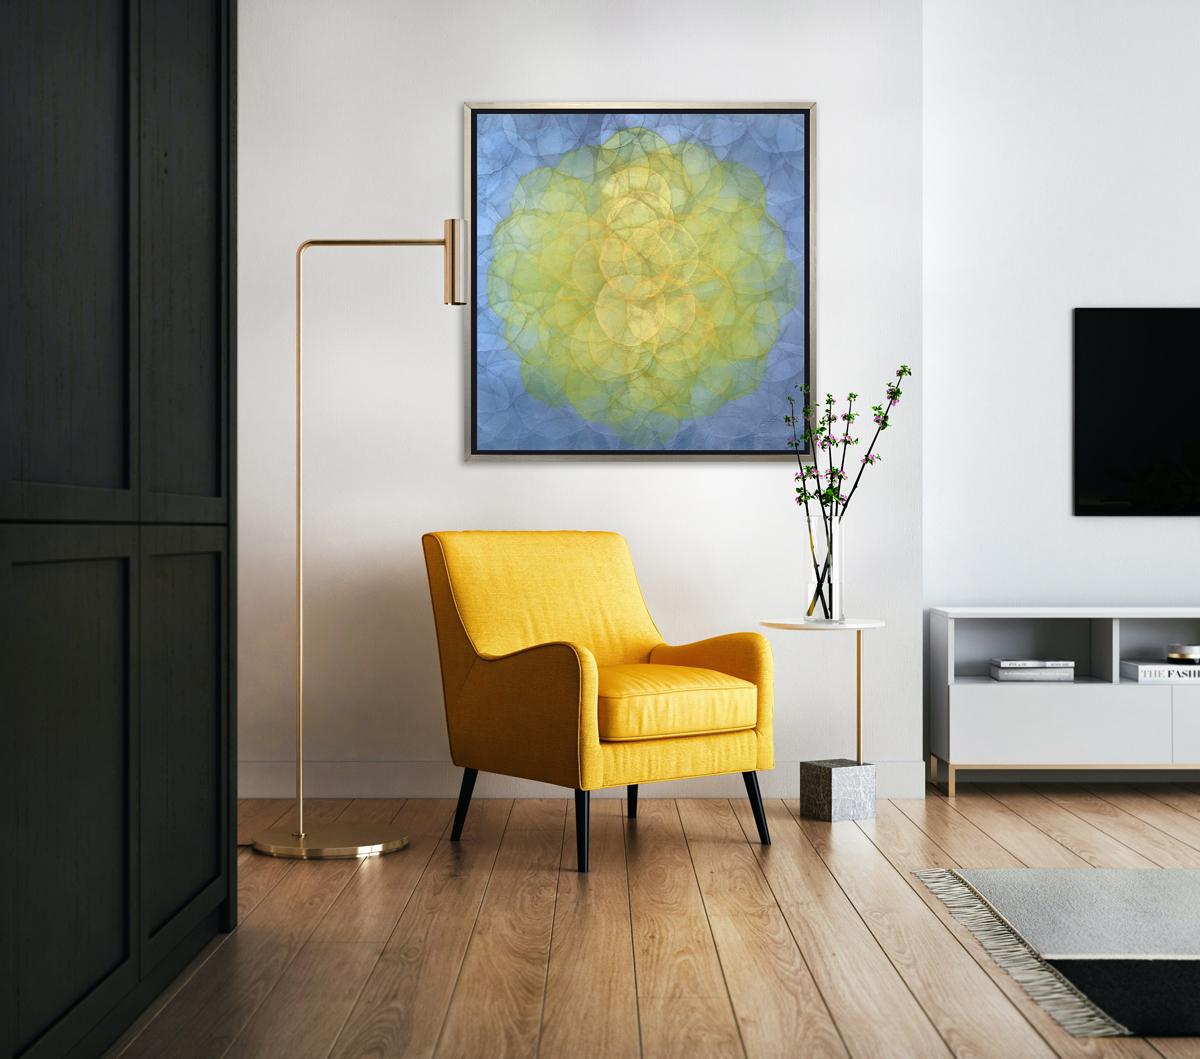 This abstract limited edition print by Roger Mudre features a vibrant palette with small concentric circles composing a larger yellow circle at the center of the composition, and a cool silverly grey lavender perimeter. This Limited Edition giclee